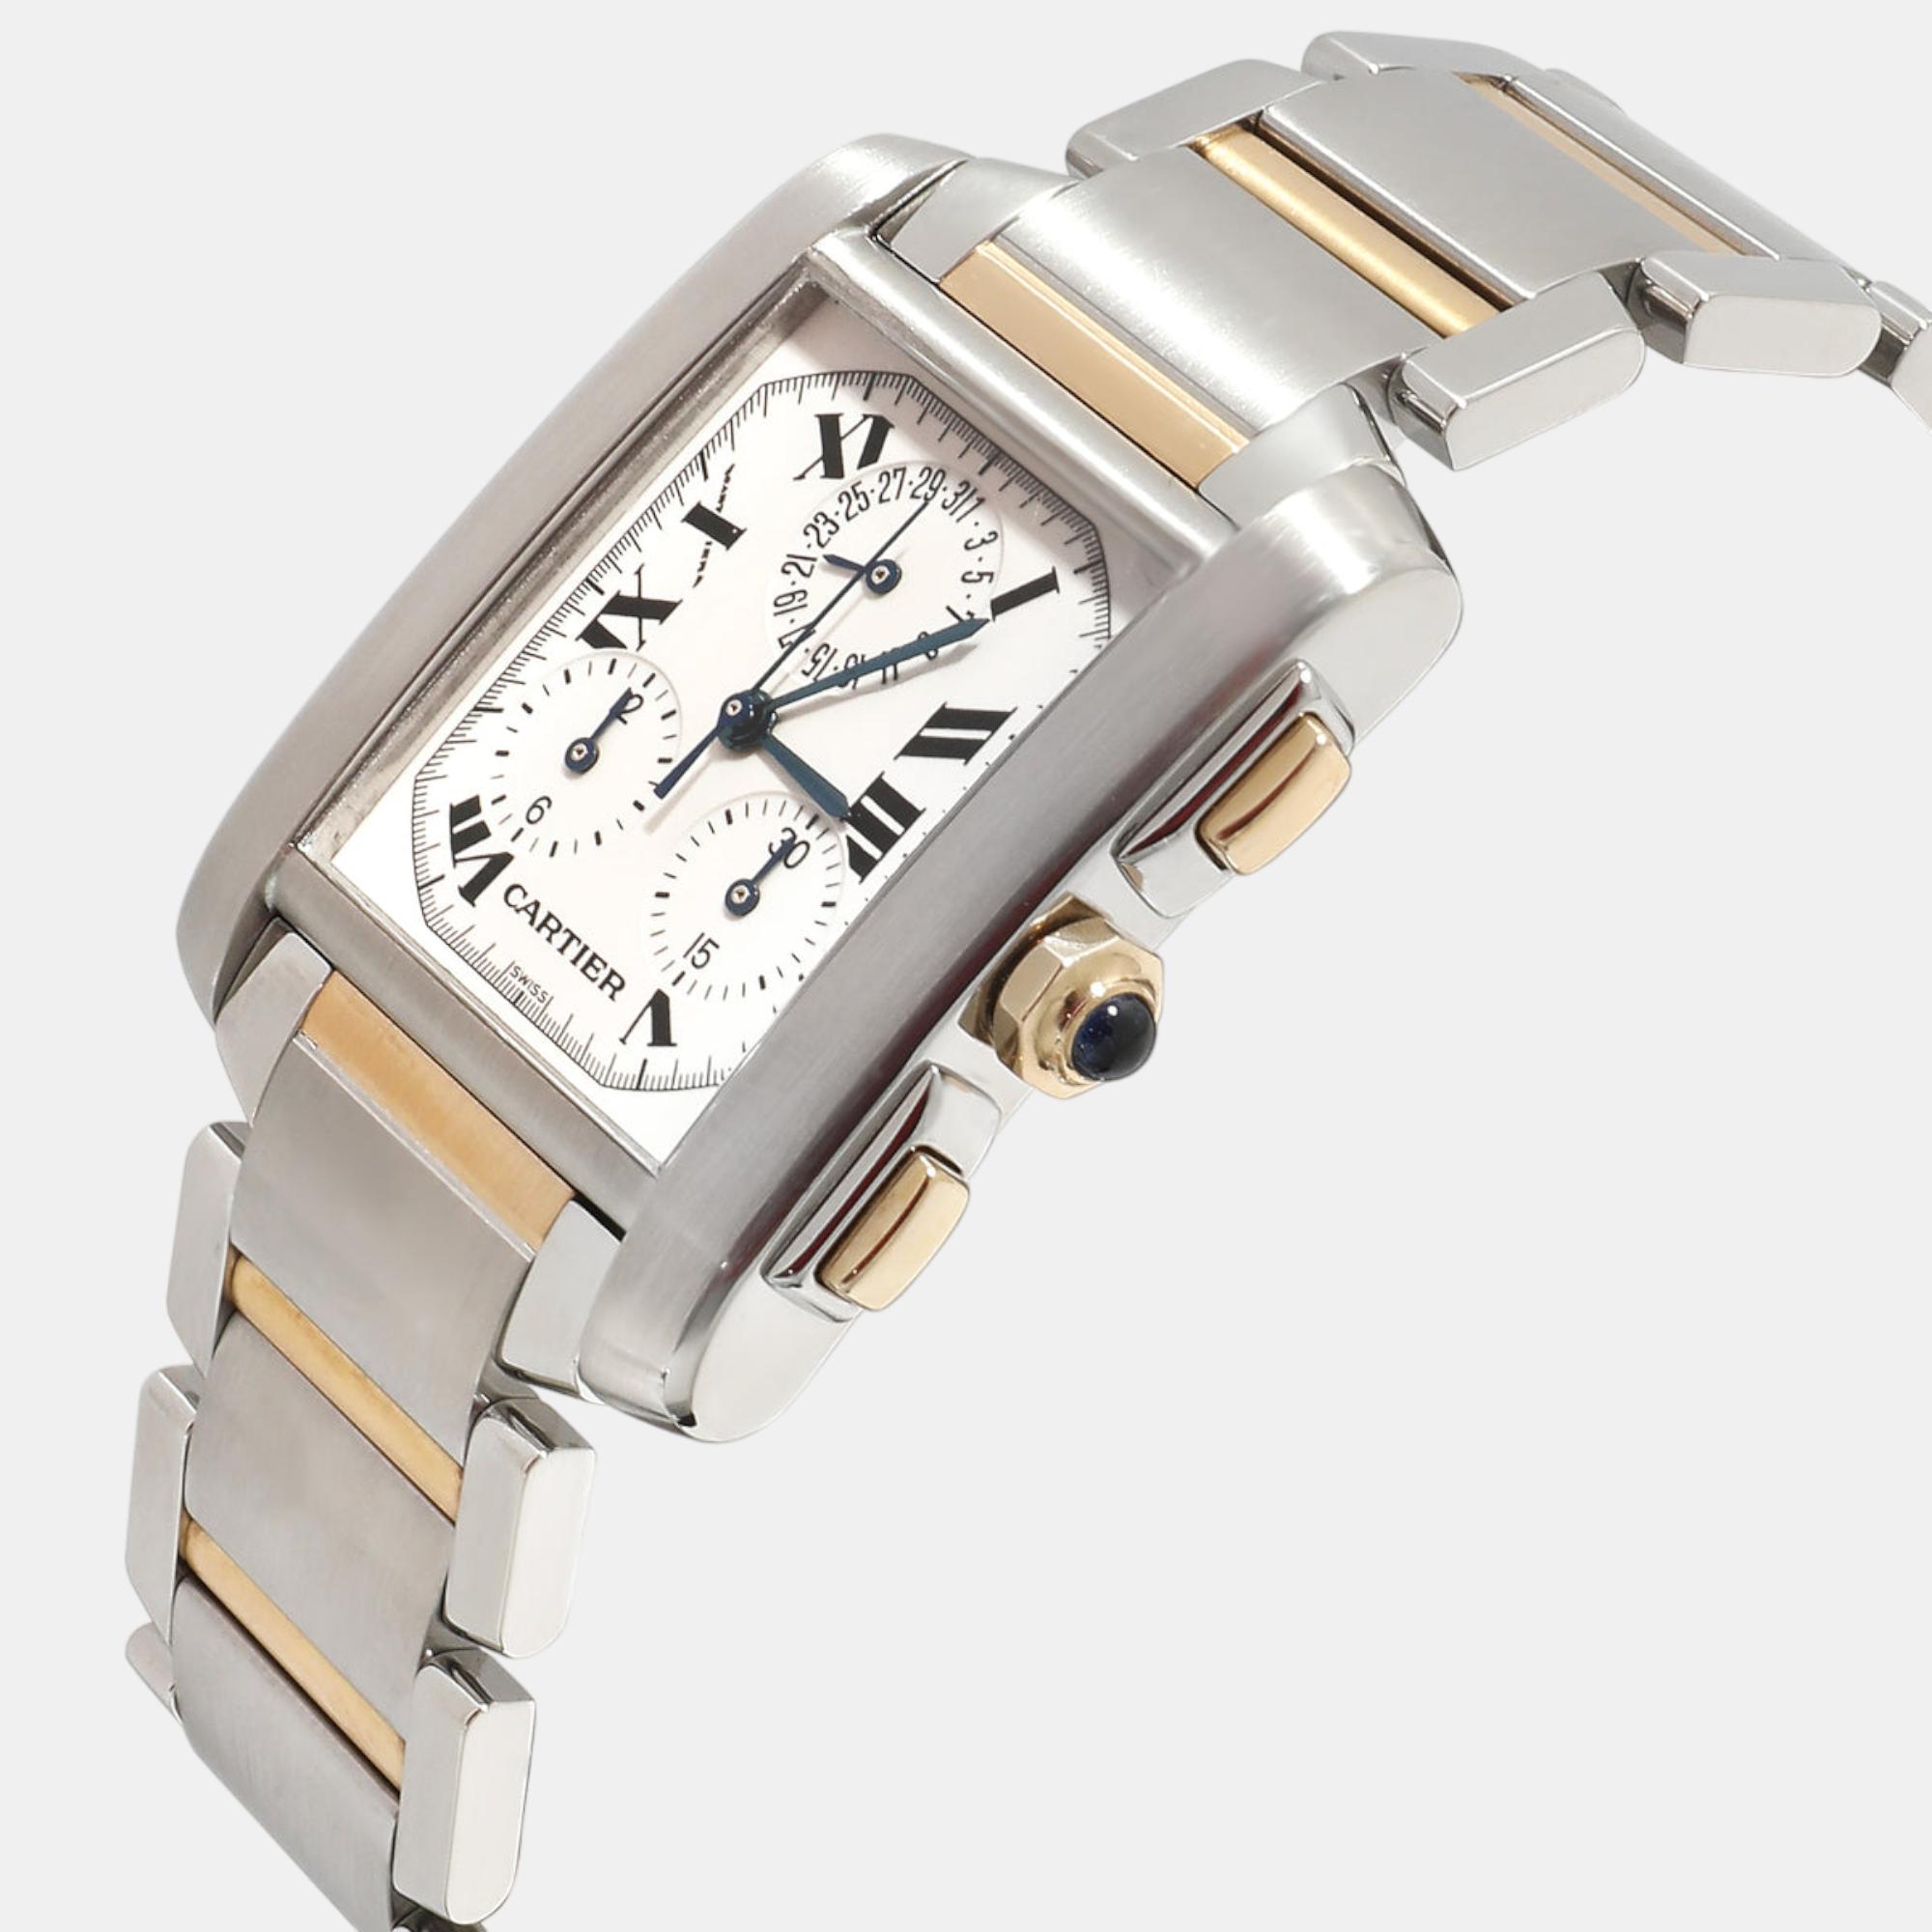 

Cartier Silver 18k Yellow Gold And Stainless Steel Tank Francaise W51004Q4 Quartz Women's Wristwatch 28 mm